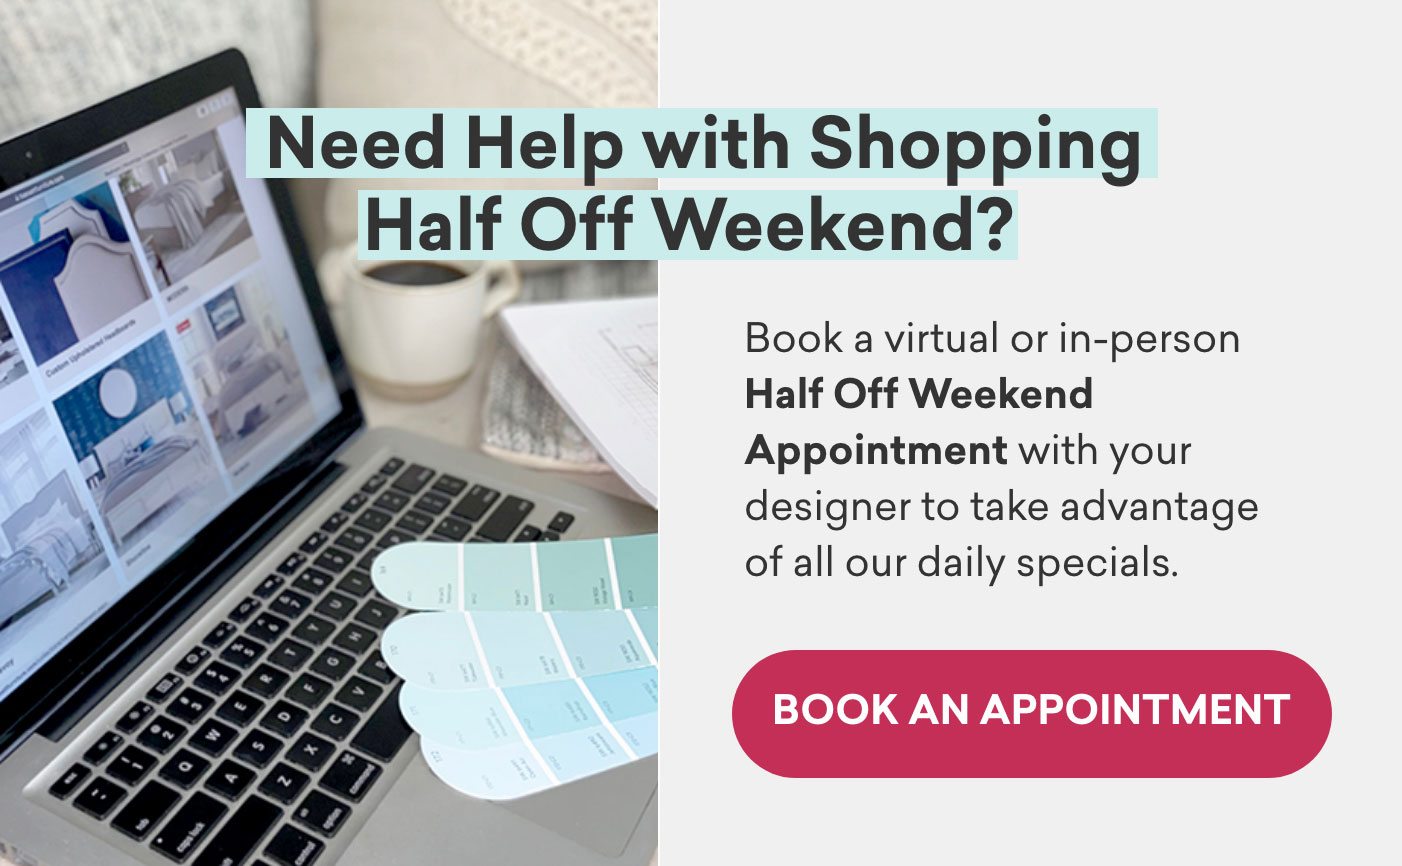 Need help with shopping the half off weekend? Book a virtual or in-person appointment.